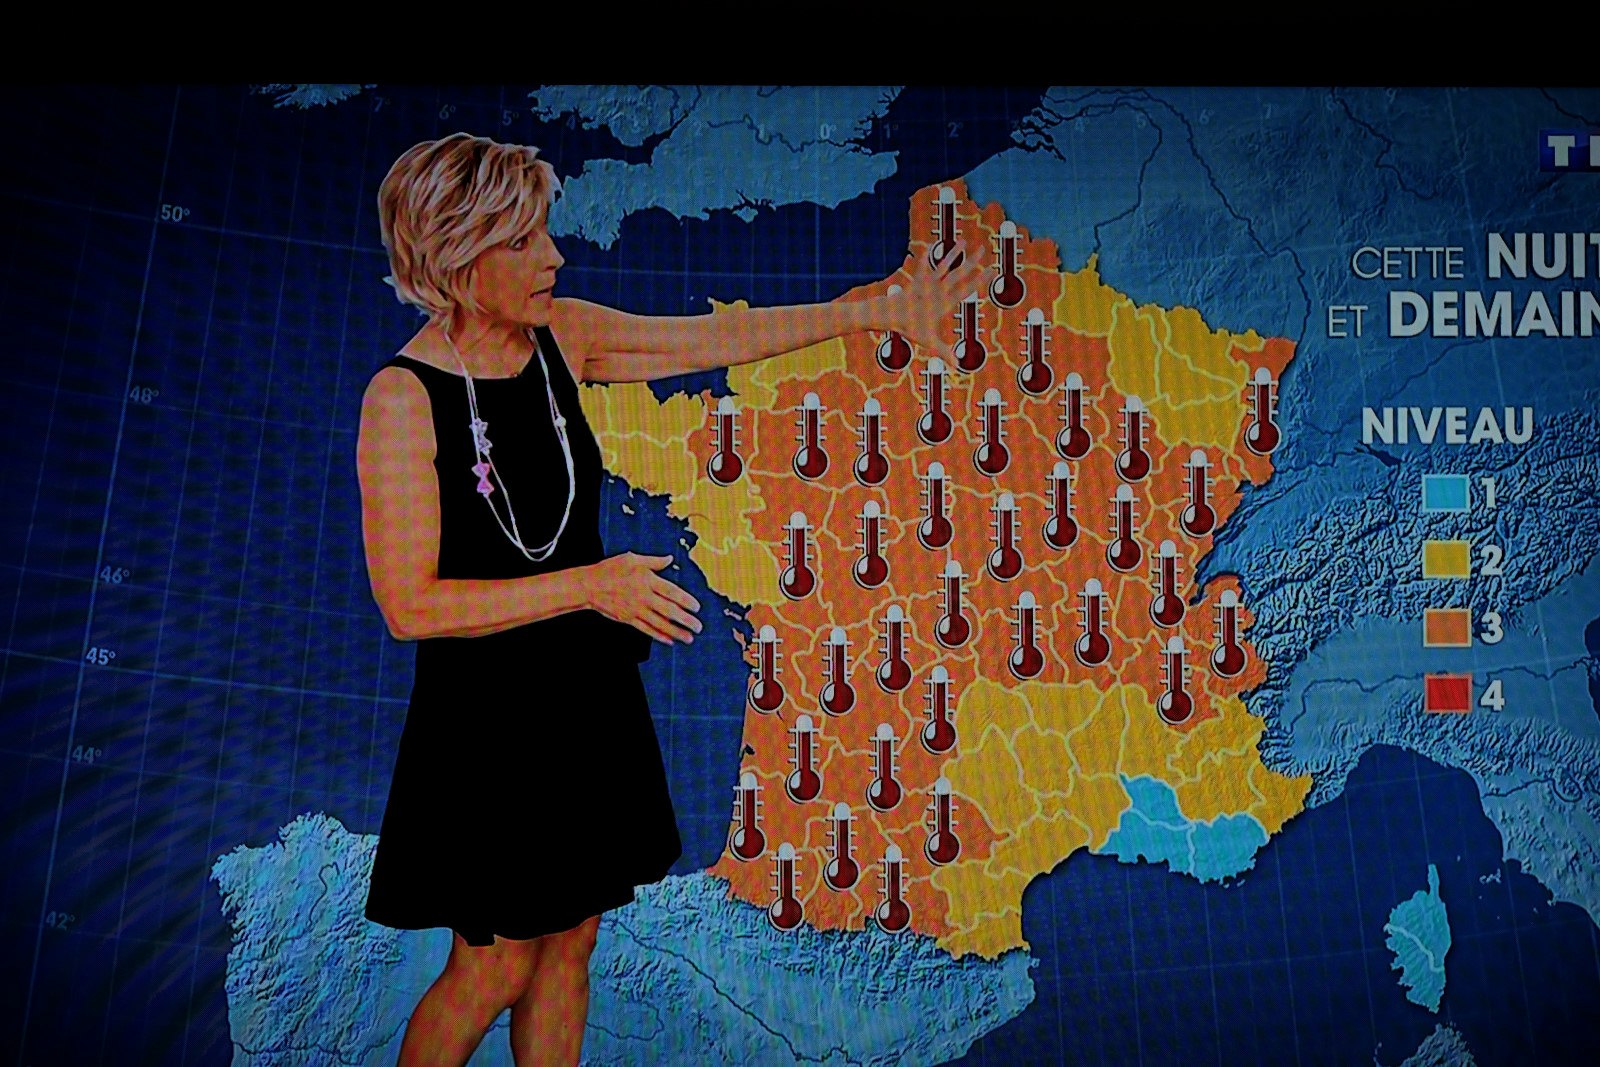 A very hot summer - TV weather report from Paris France. Photography by Kent Johnson.